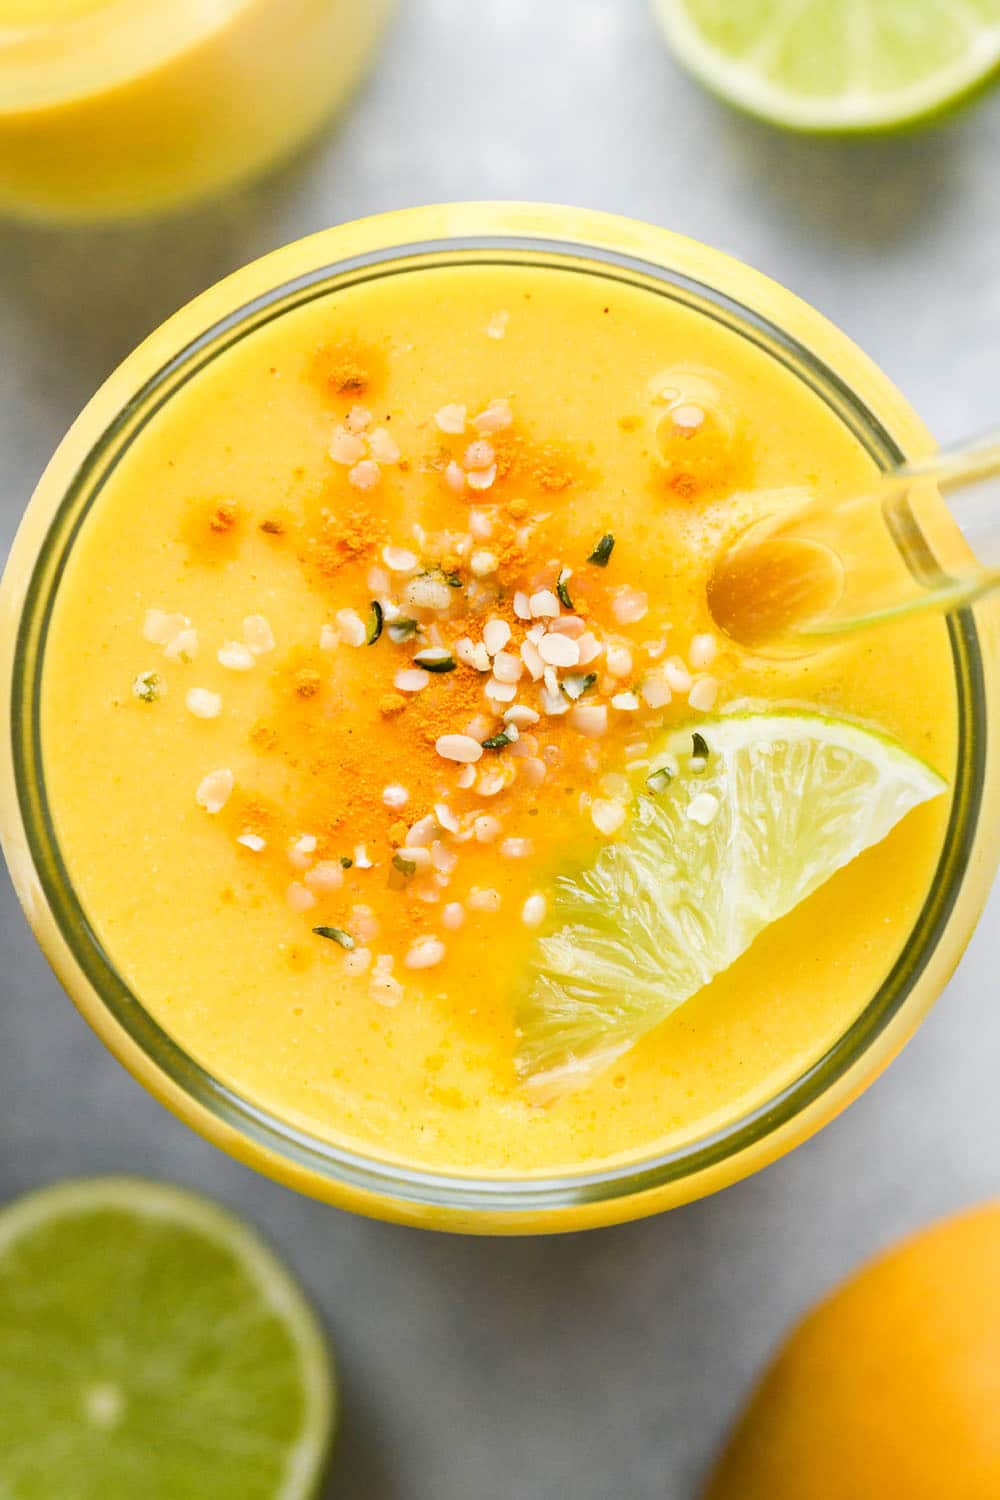 Overhead image of a cup of mango turmeric smoothie garnished with dried turmeric, hemp seeds, and a lime wedge.